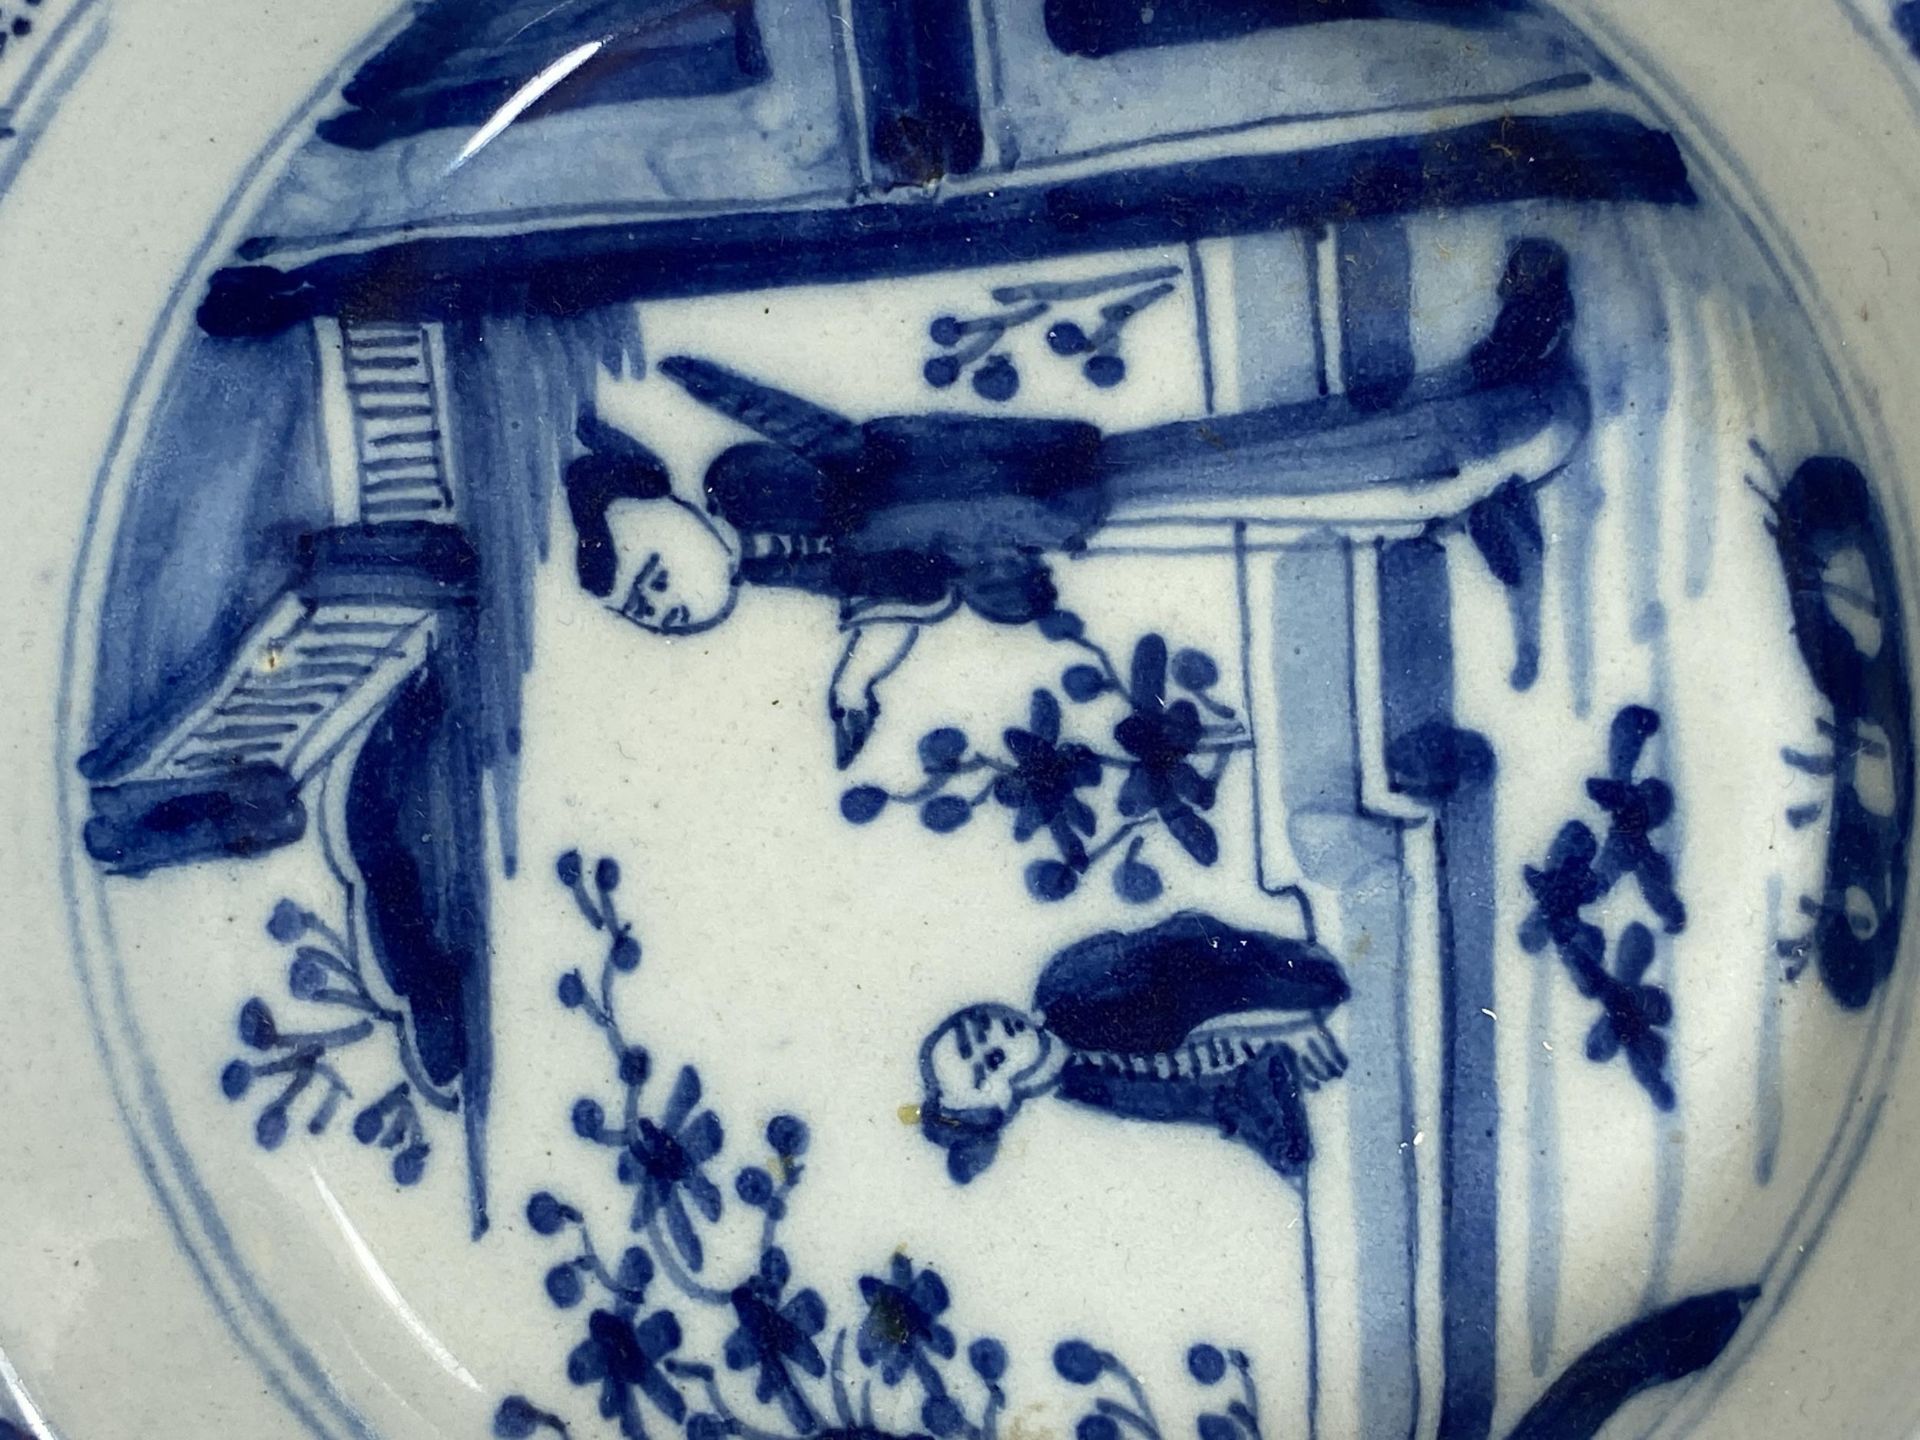 AN EARLY 19TH CENTURY DELFT ORIENTAL DESIGN BLUE AND WHITE PORCELAIN PLATE, DIAMETER 16.5CM - Image 3 of 6